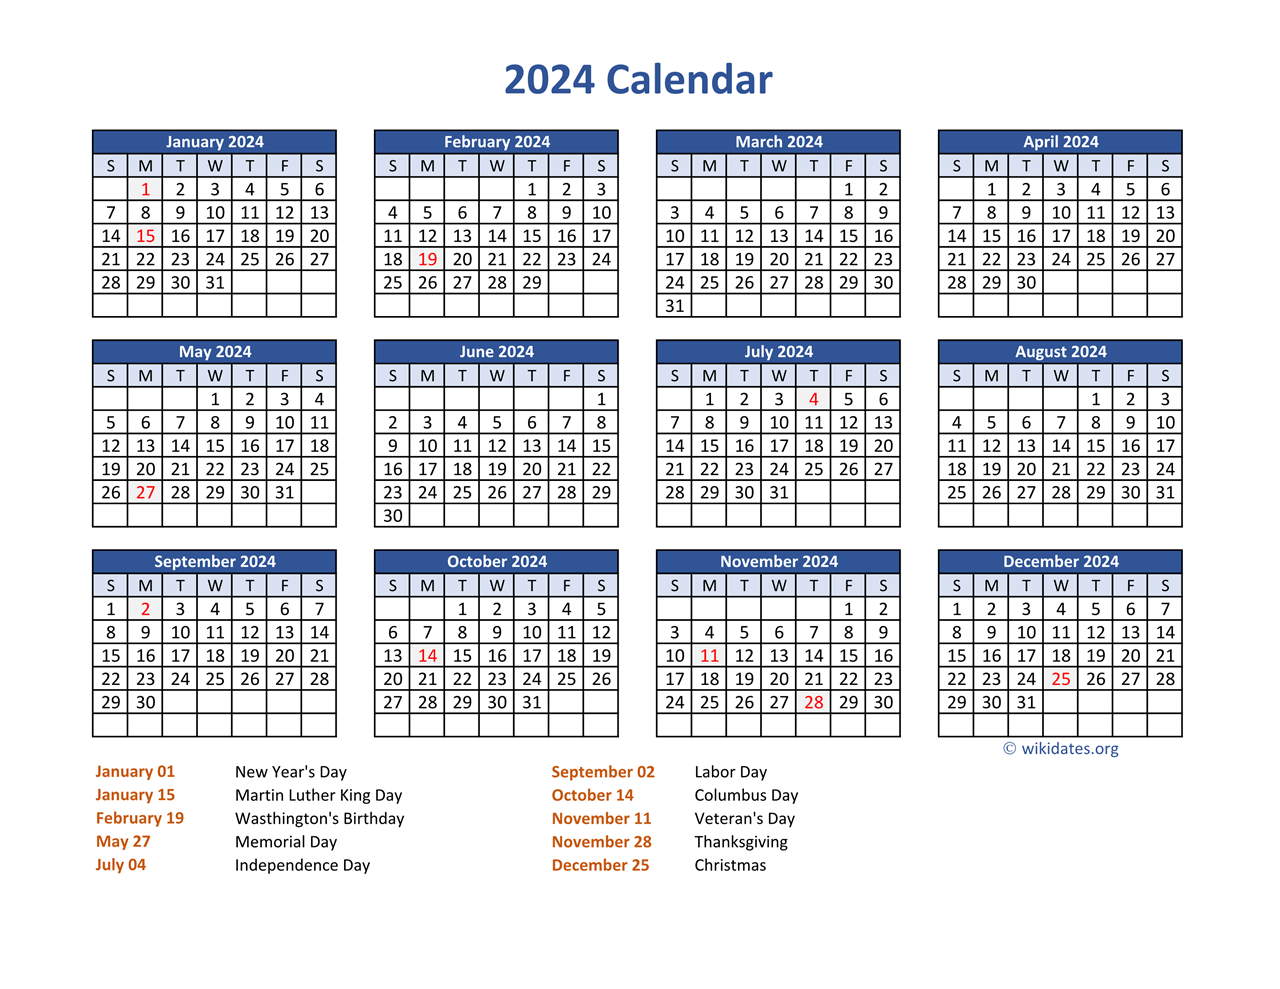 Pdf Calendar 2024 With Federal Holidays | Wikidates for 2024 And 2024 Calendar With Holidays Printable